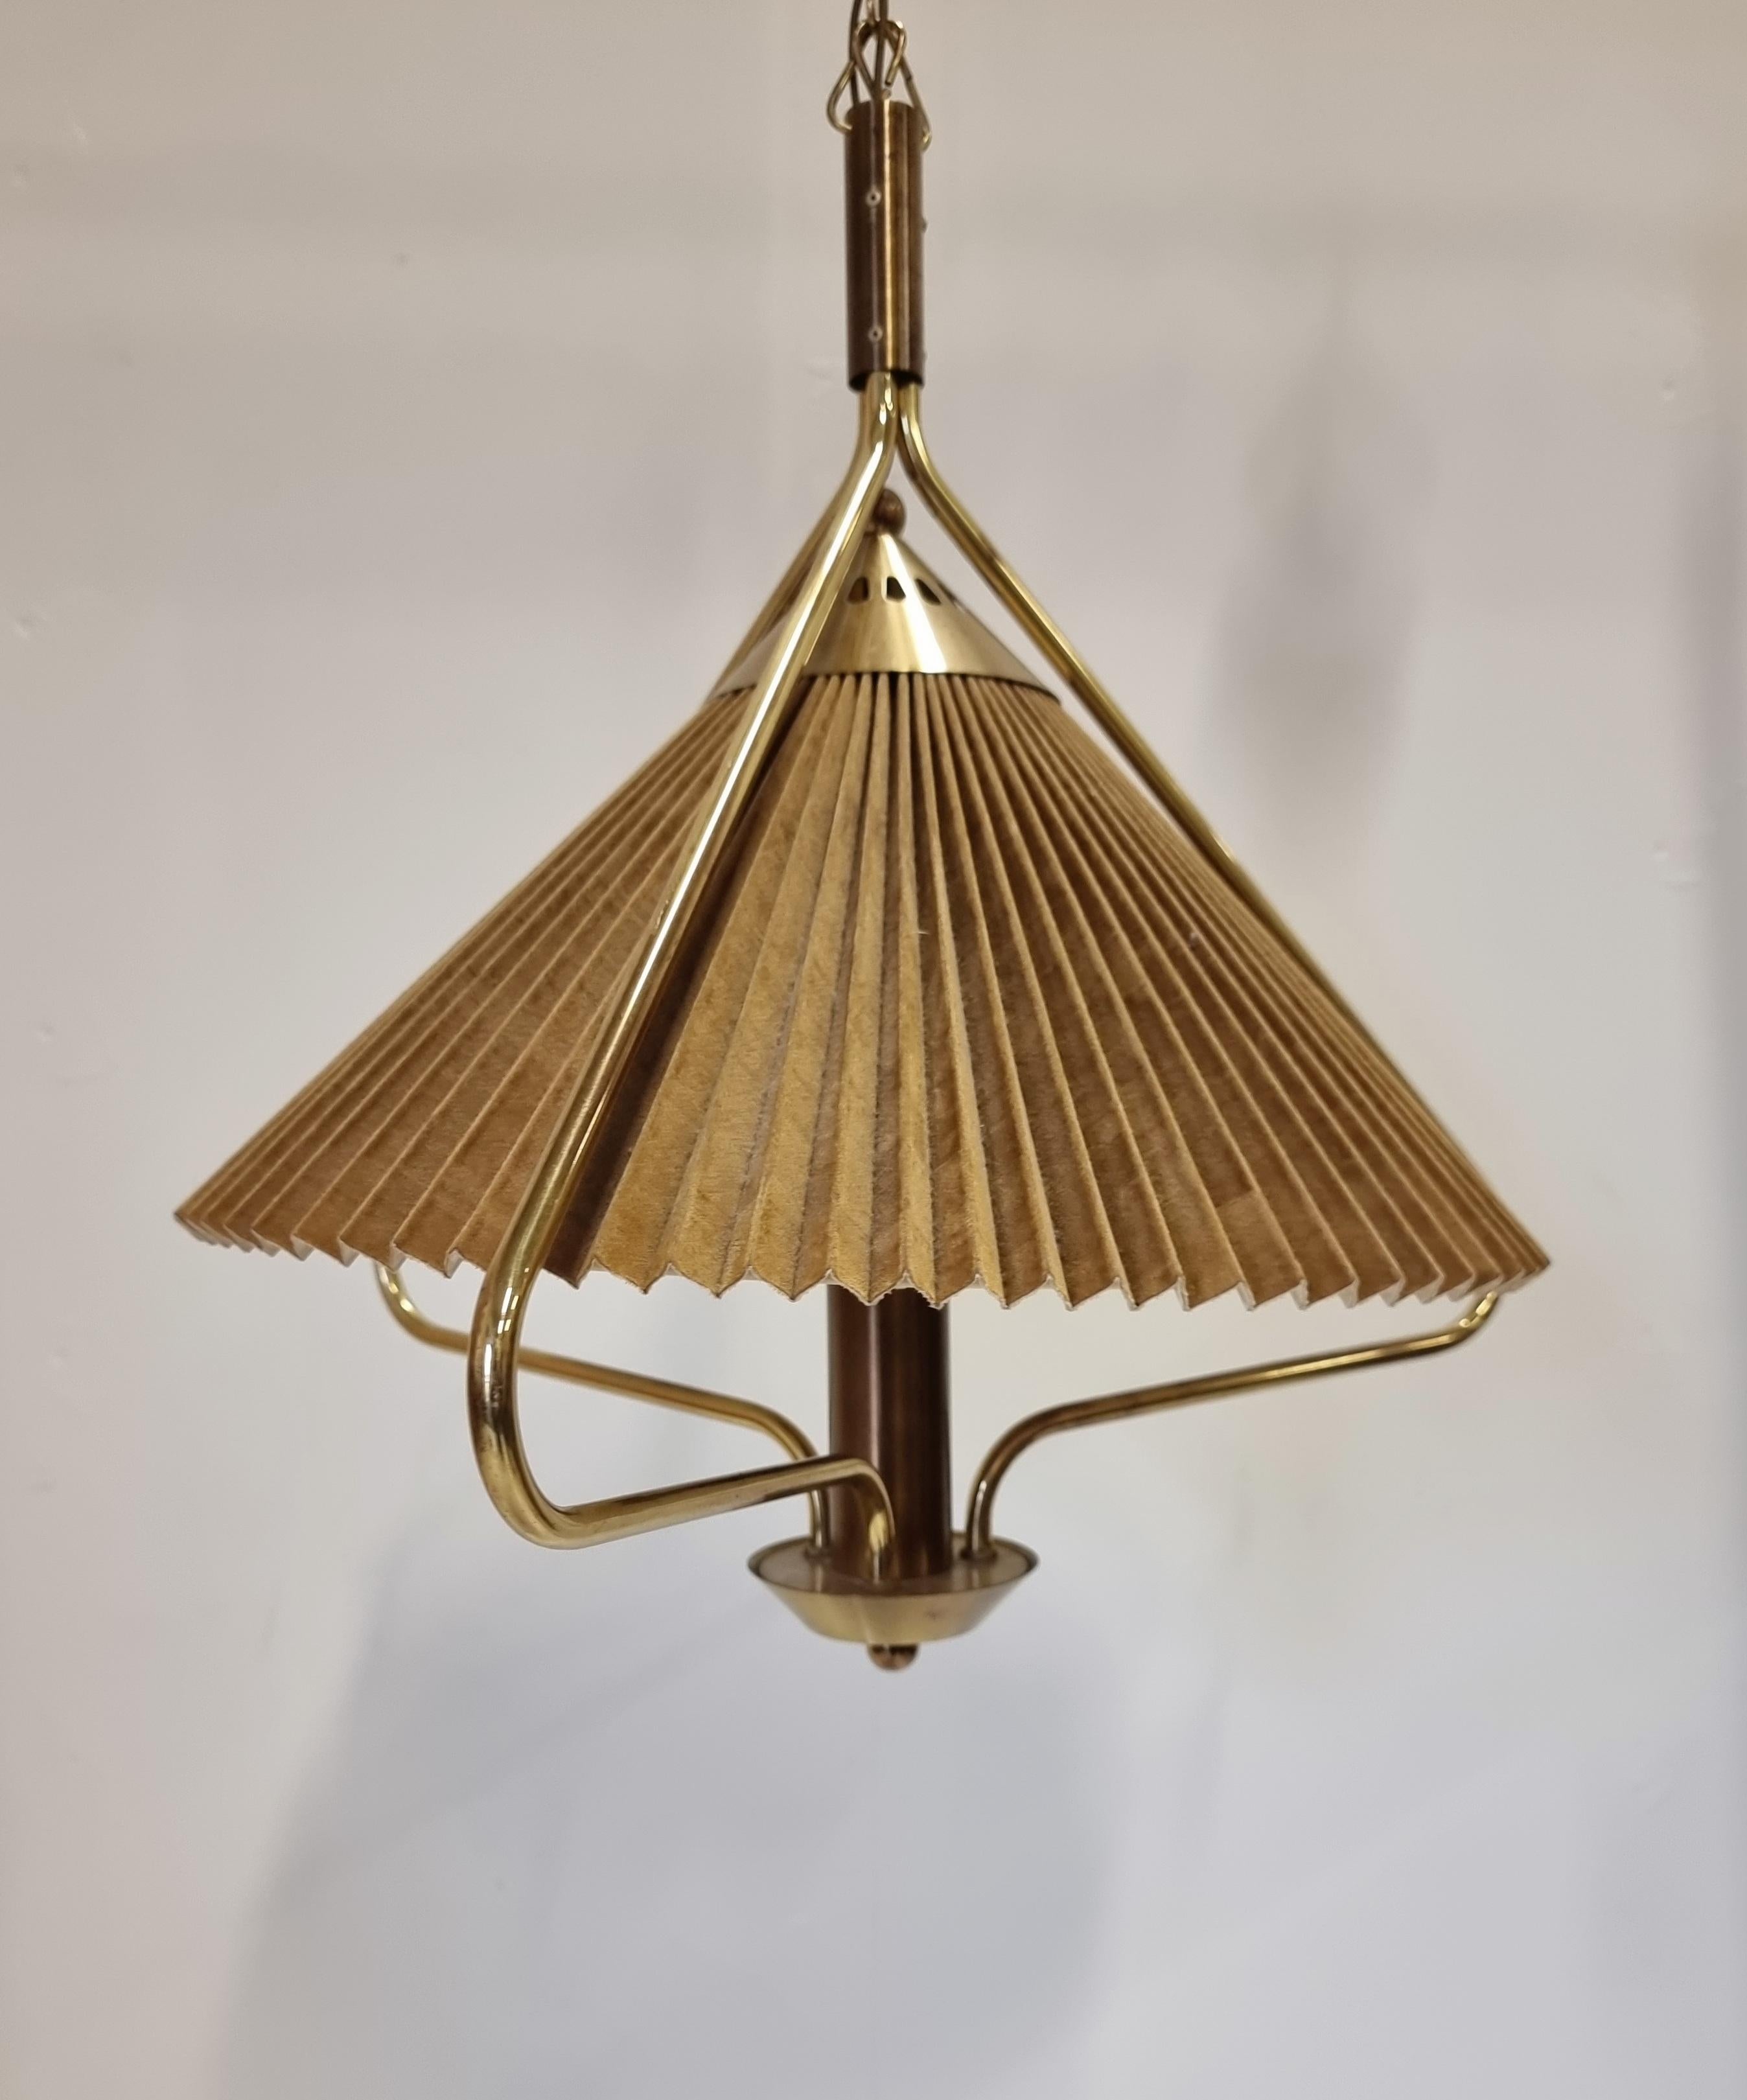 Pendant in brass and pleated lampshade with suede-like fabric in dark golden-brown. Made by T. RØSTE & CO, marked: TR & CO 449. This is a rare model made in Norway, midcentury / Scandinavian Modern. 

Total height with original chain 142 cm. In good